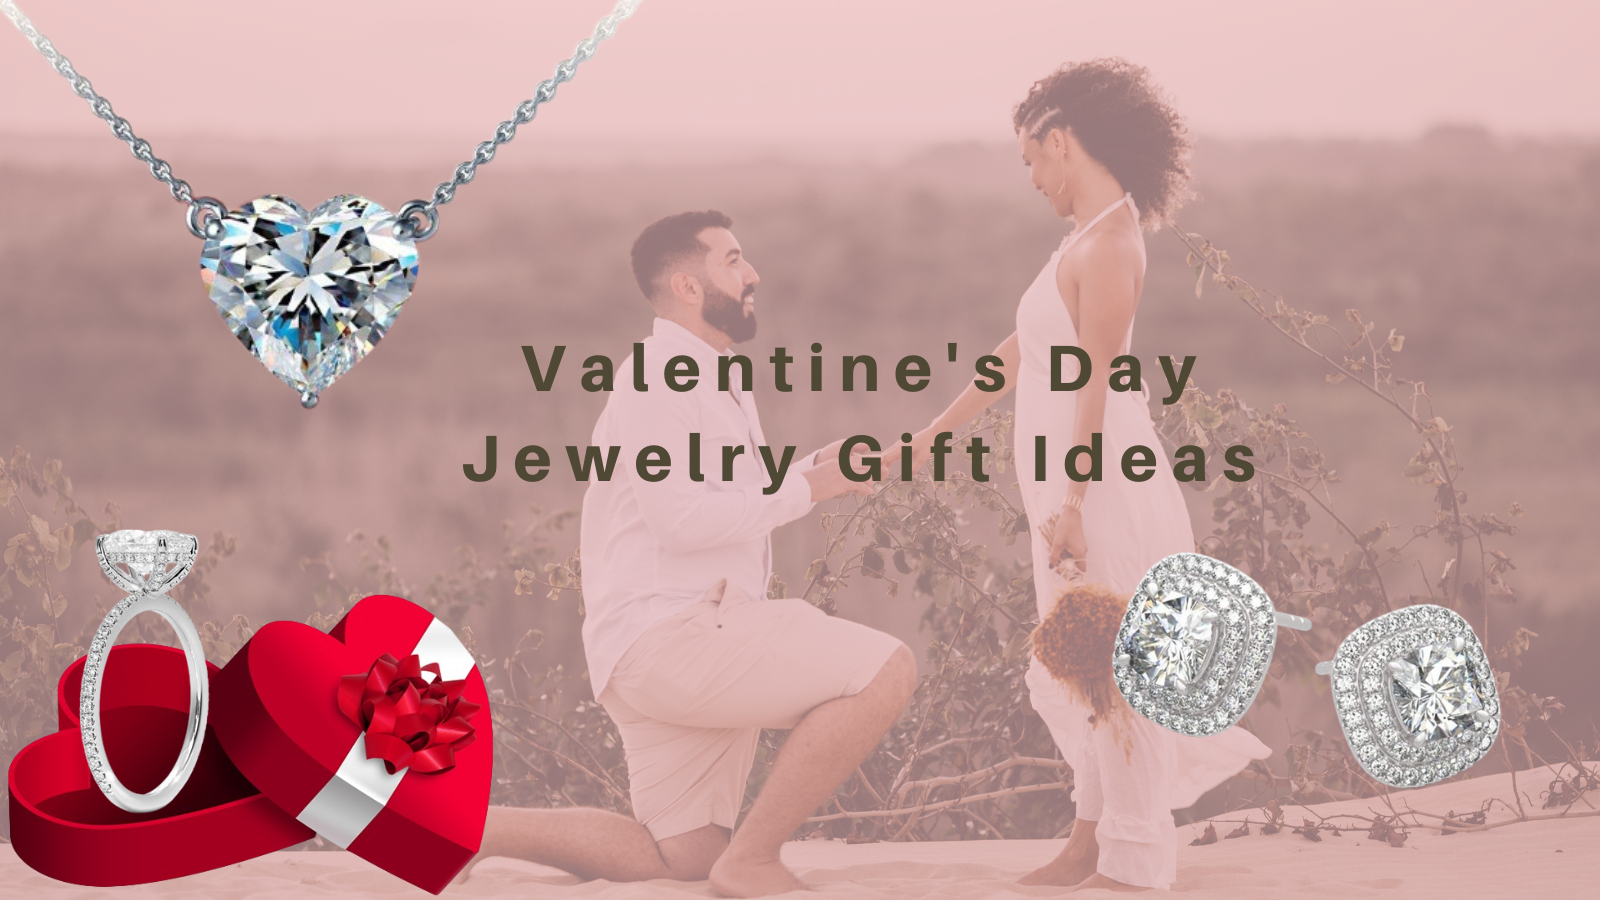 This Valentine’s Day Moissanite Jewelry Gift For Your Love 💝